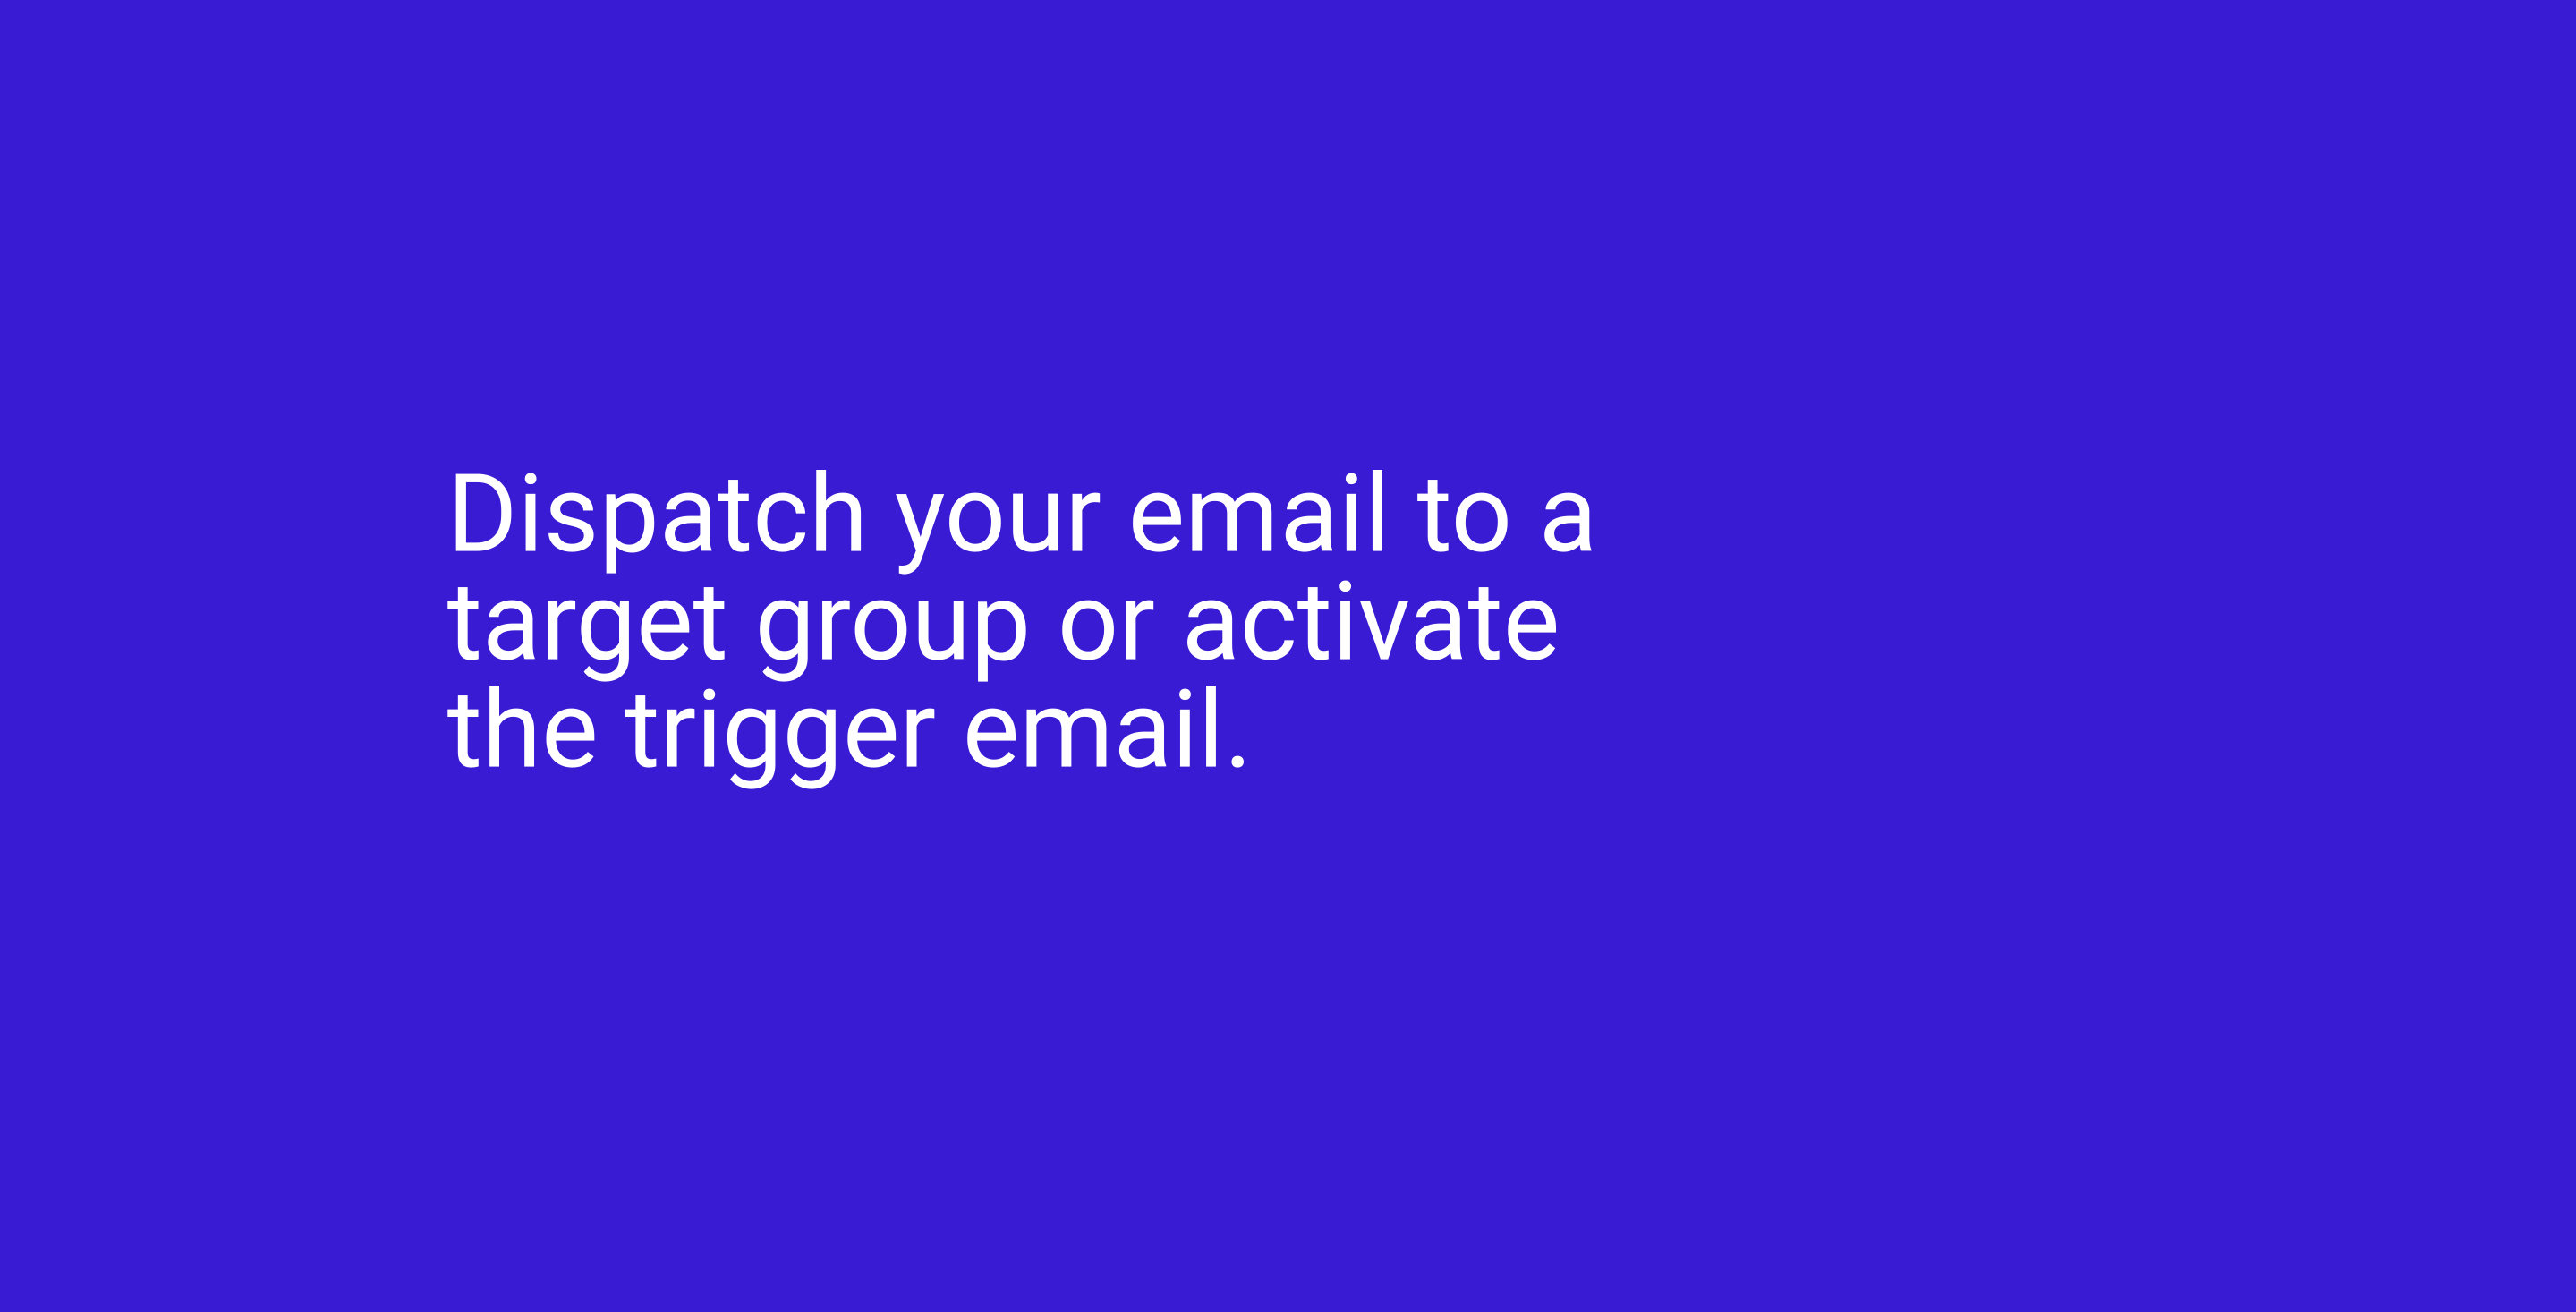 Dispatch your email to a target group or activate the trigger email.